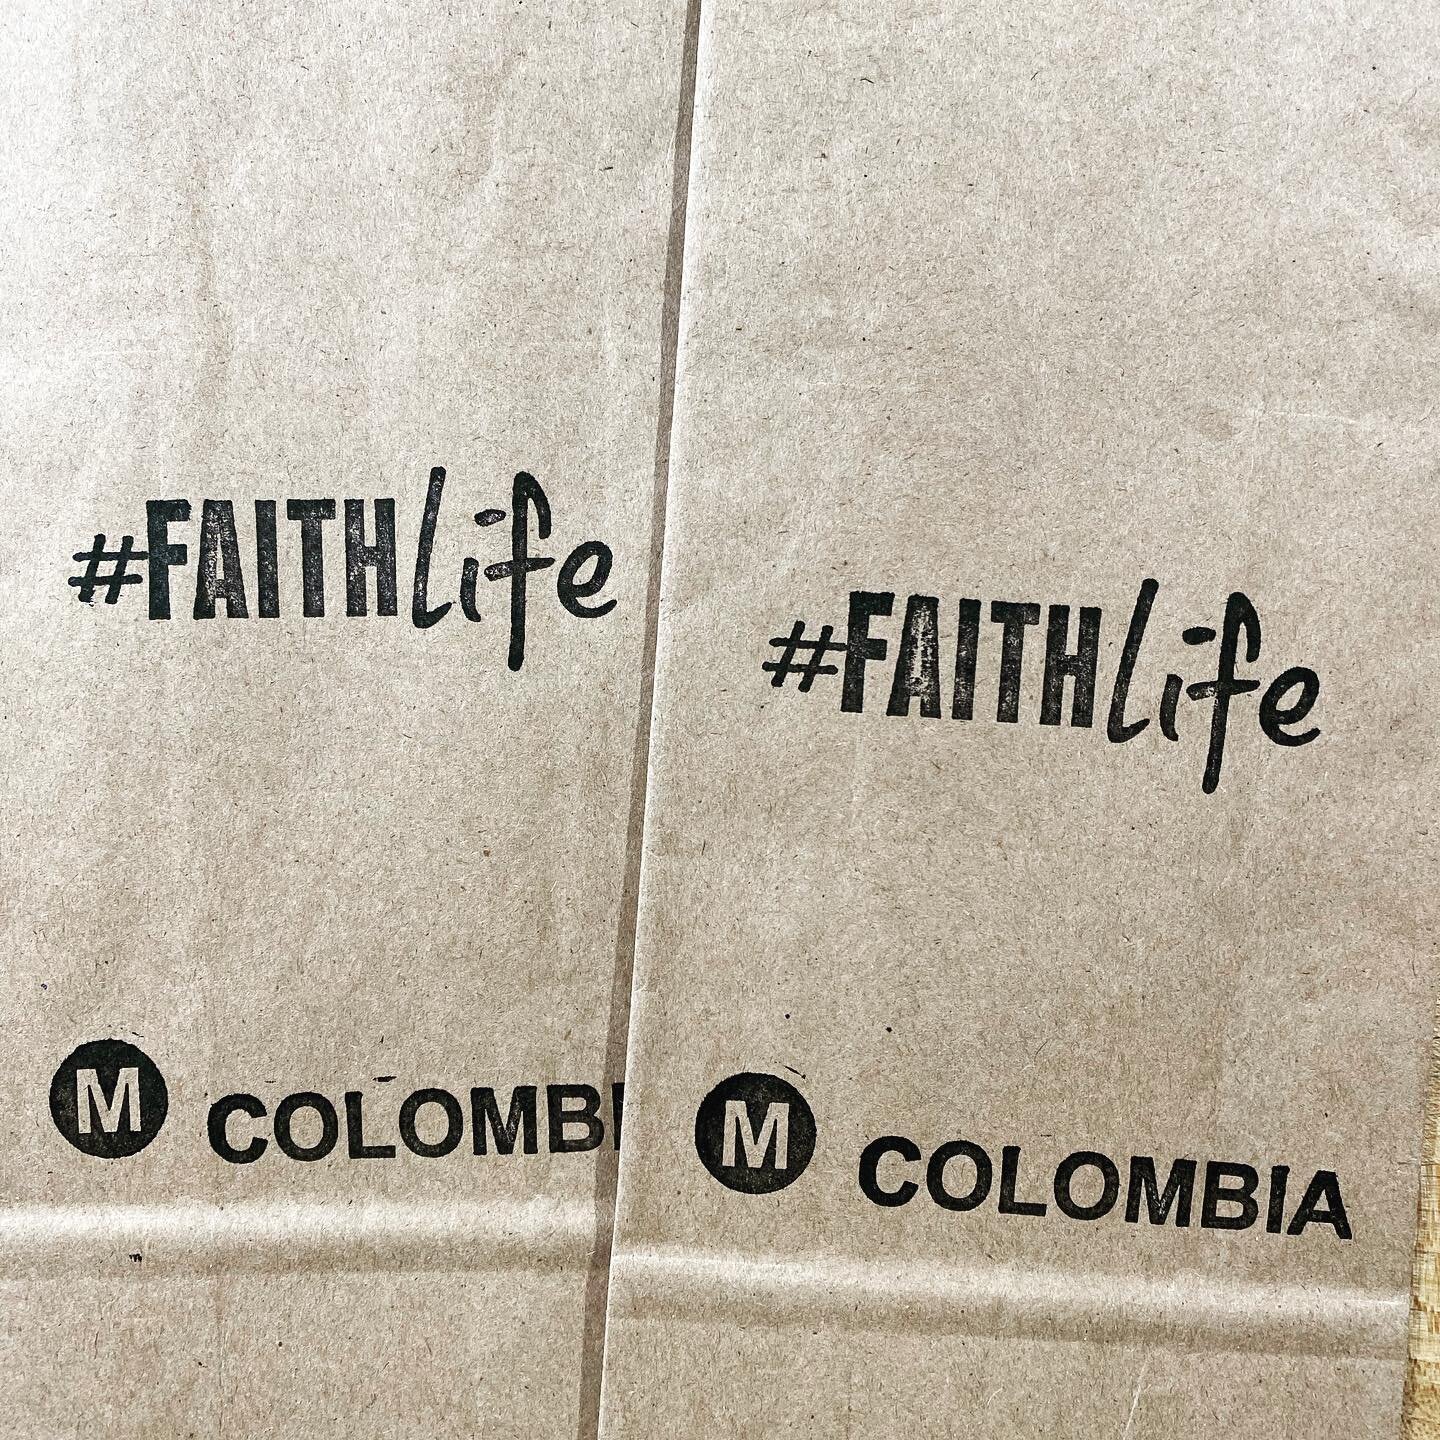 Stamps aren&rsquo;t always perfect, that&rsquo;s what we like about them. @faithlife.market 

Enjoy the weekend!